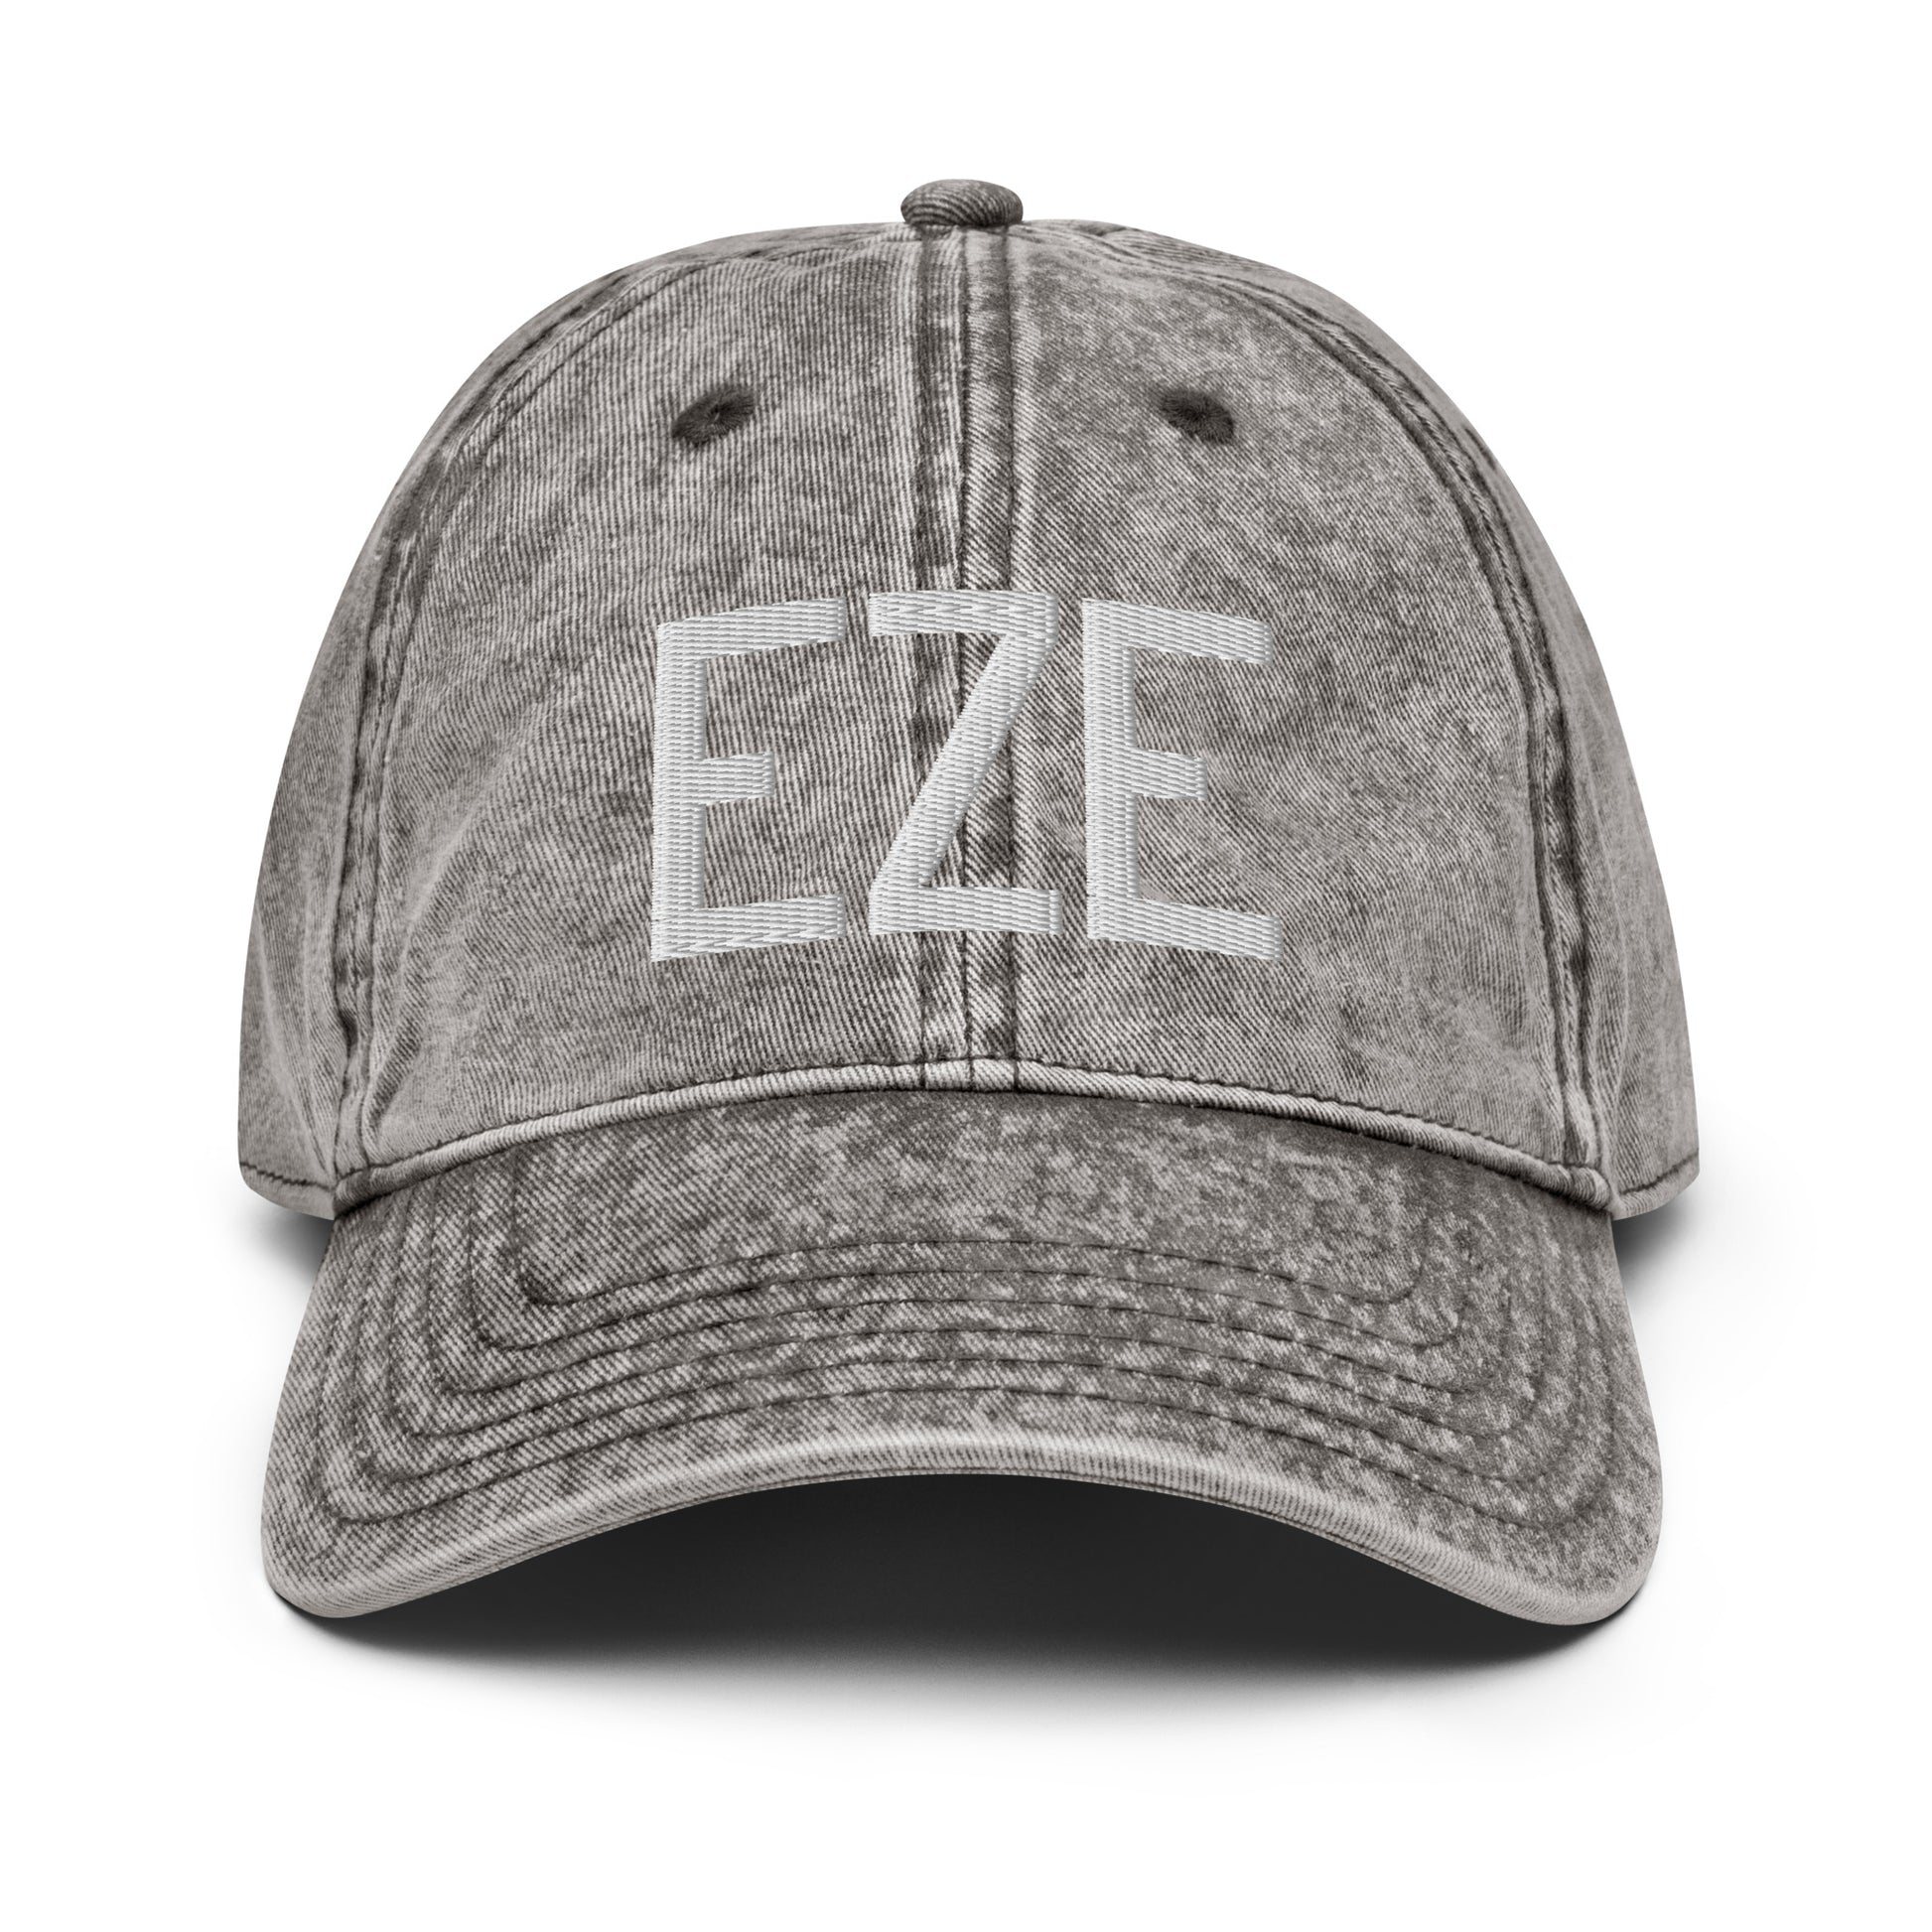 Airport Code Twill Cap - White • EZE Buenos Aires • YHM Designs - Image 28